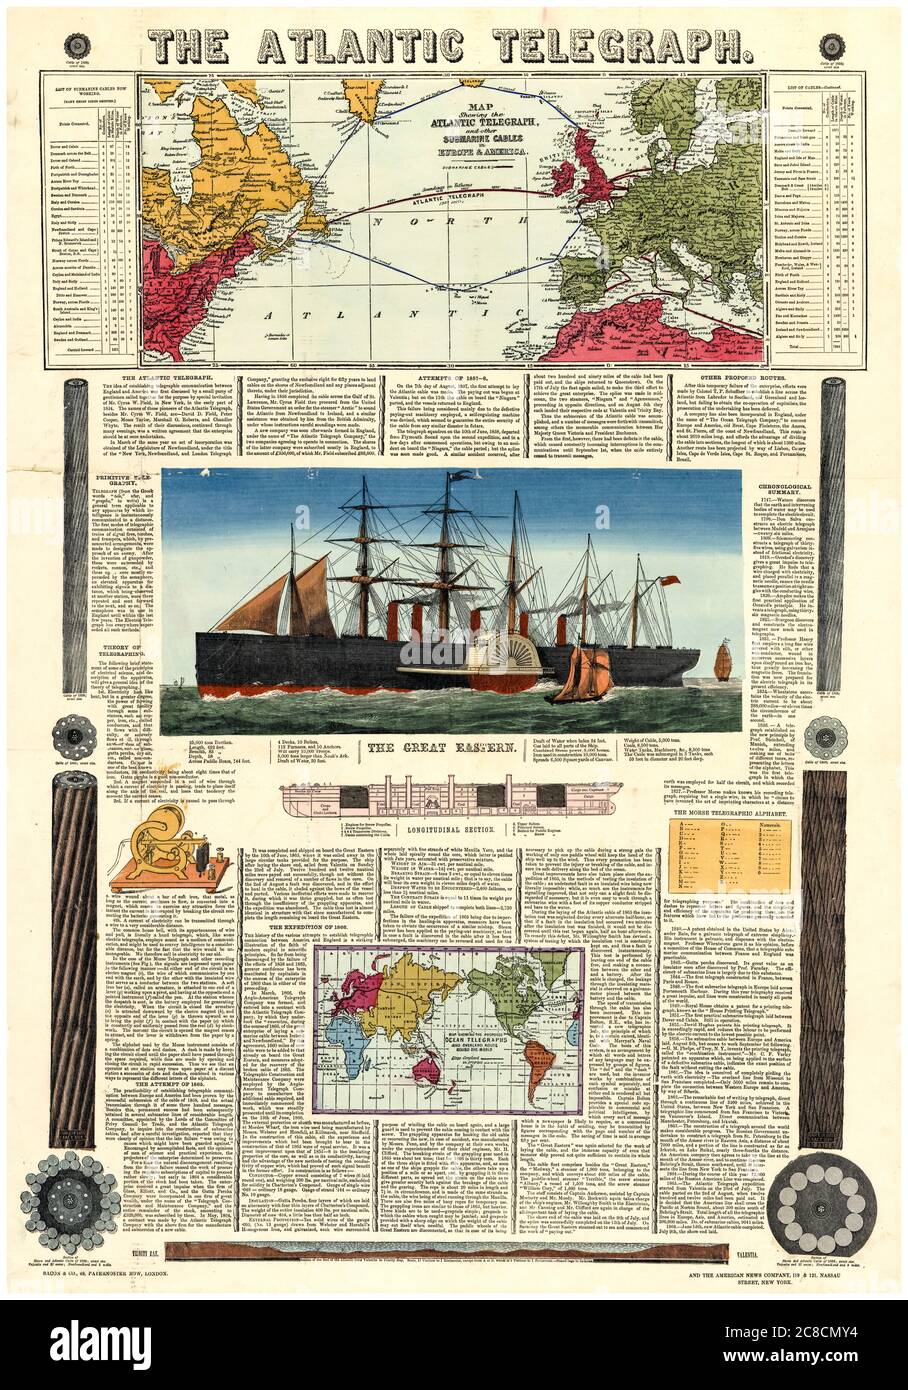 Bacon's vintage infographic chart and map of the Transatlantic Telegraph route across the Atlantic Ocean, 1865 Stock Photo